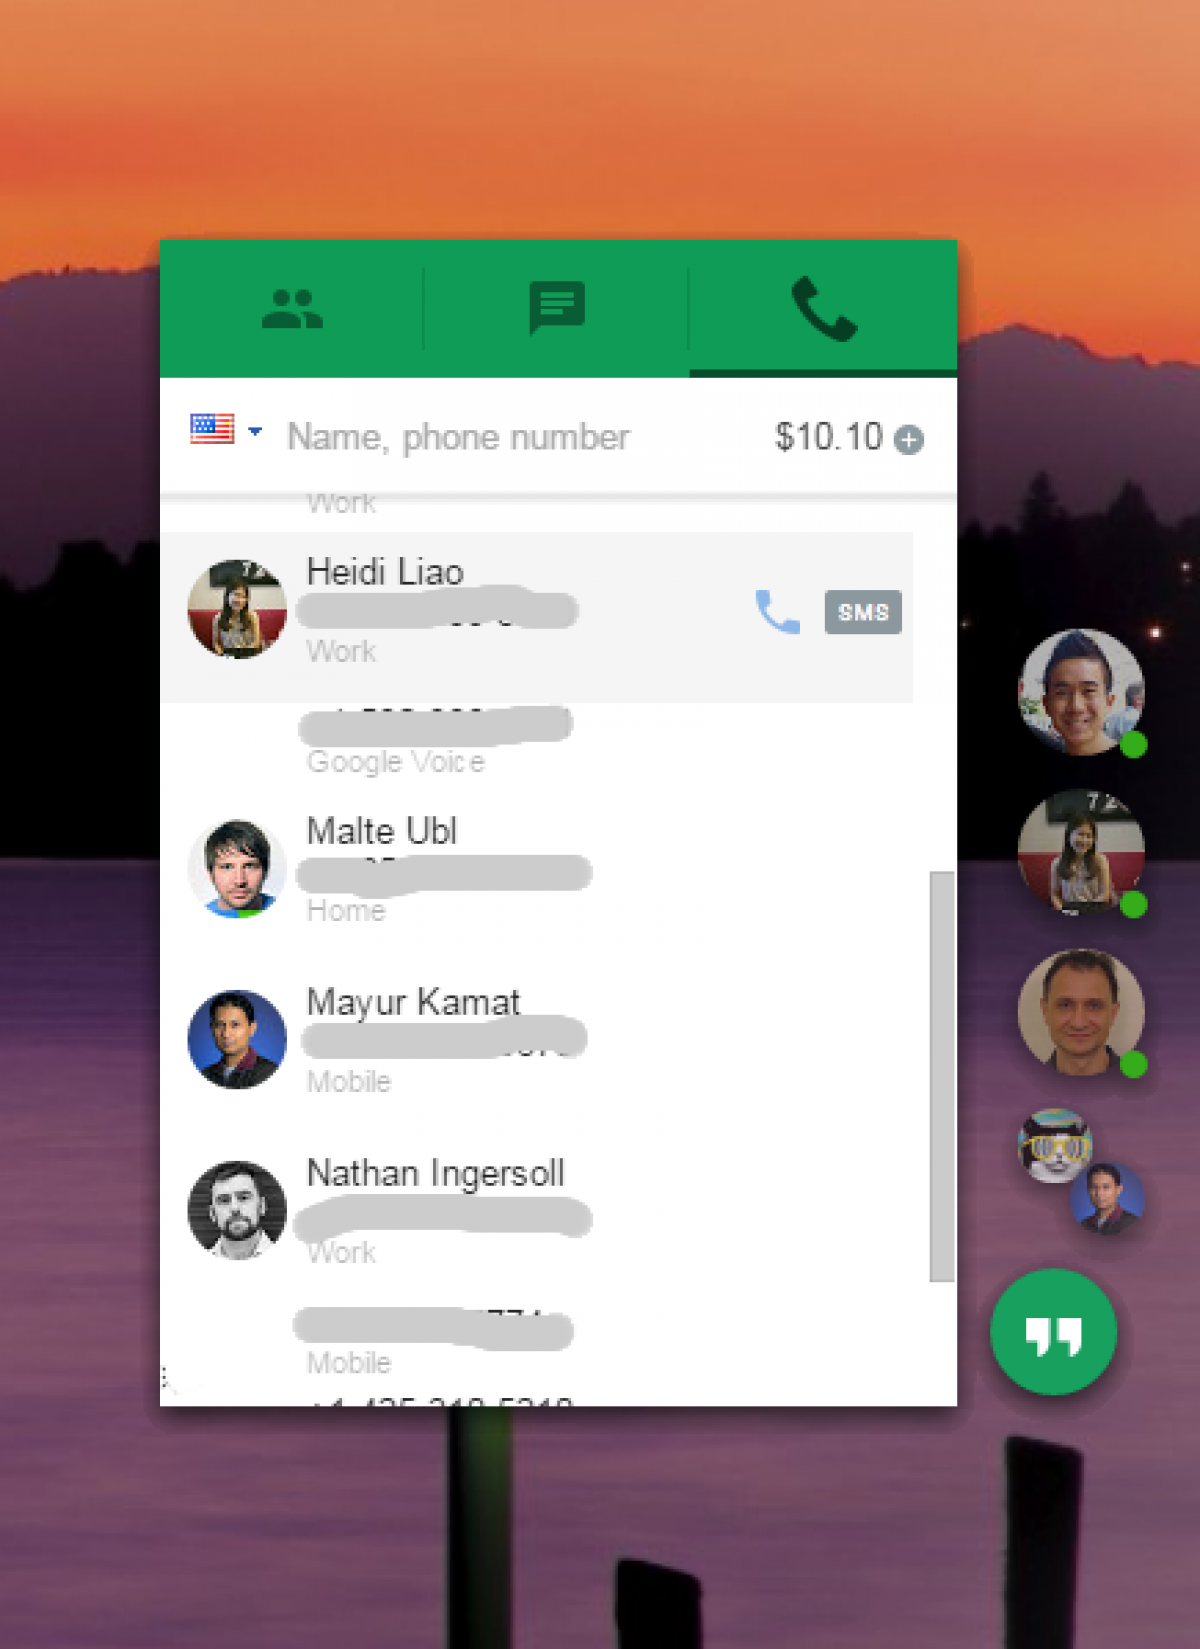 7 Replies to “How to Make Free Wi-Fi Calls with Google Hangouts Dialer Without a SIM Card”